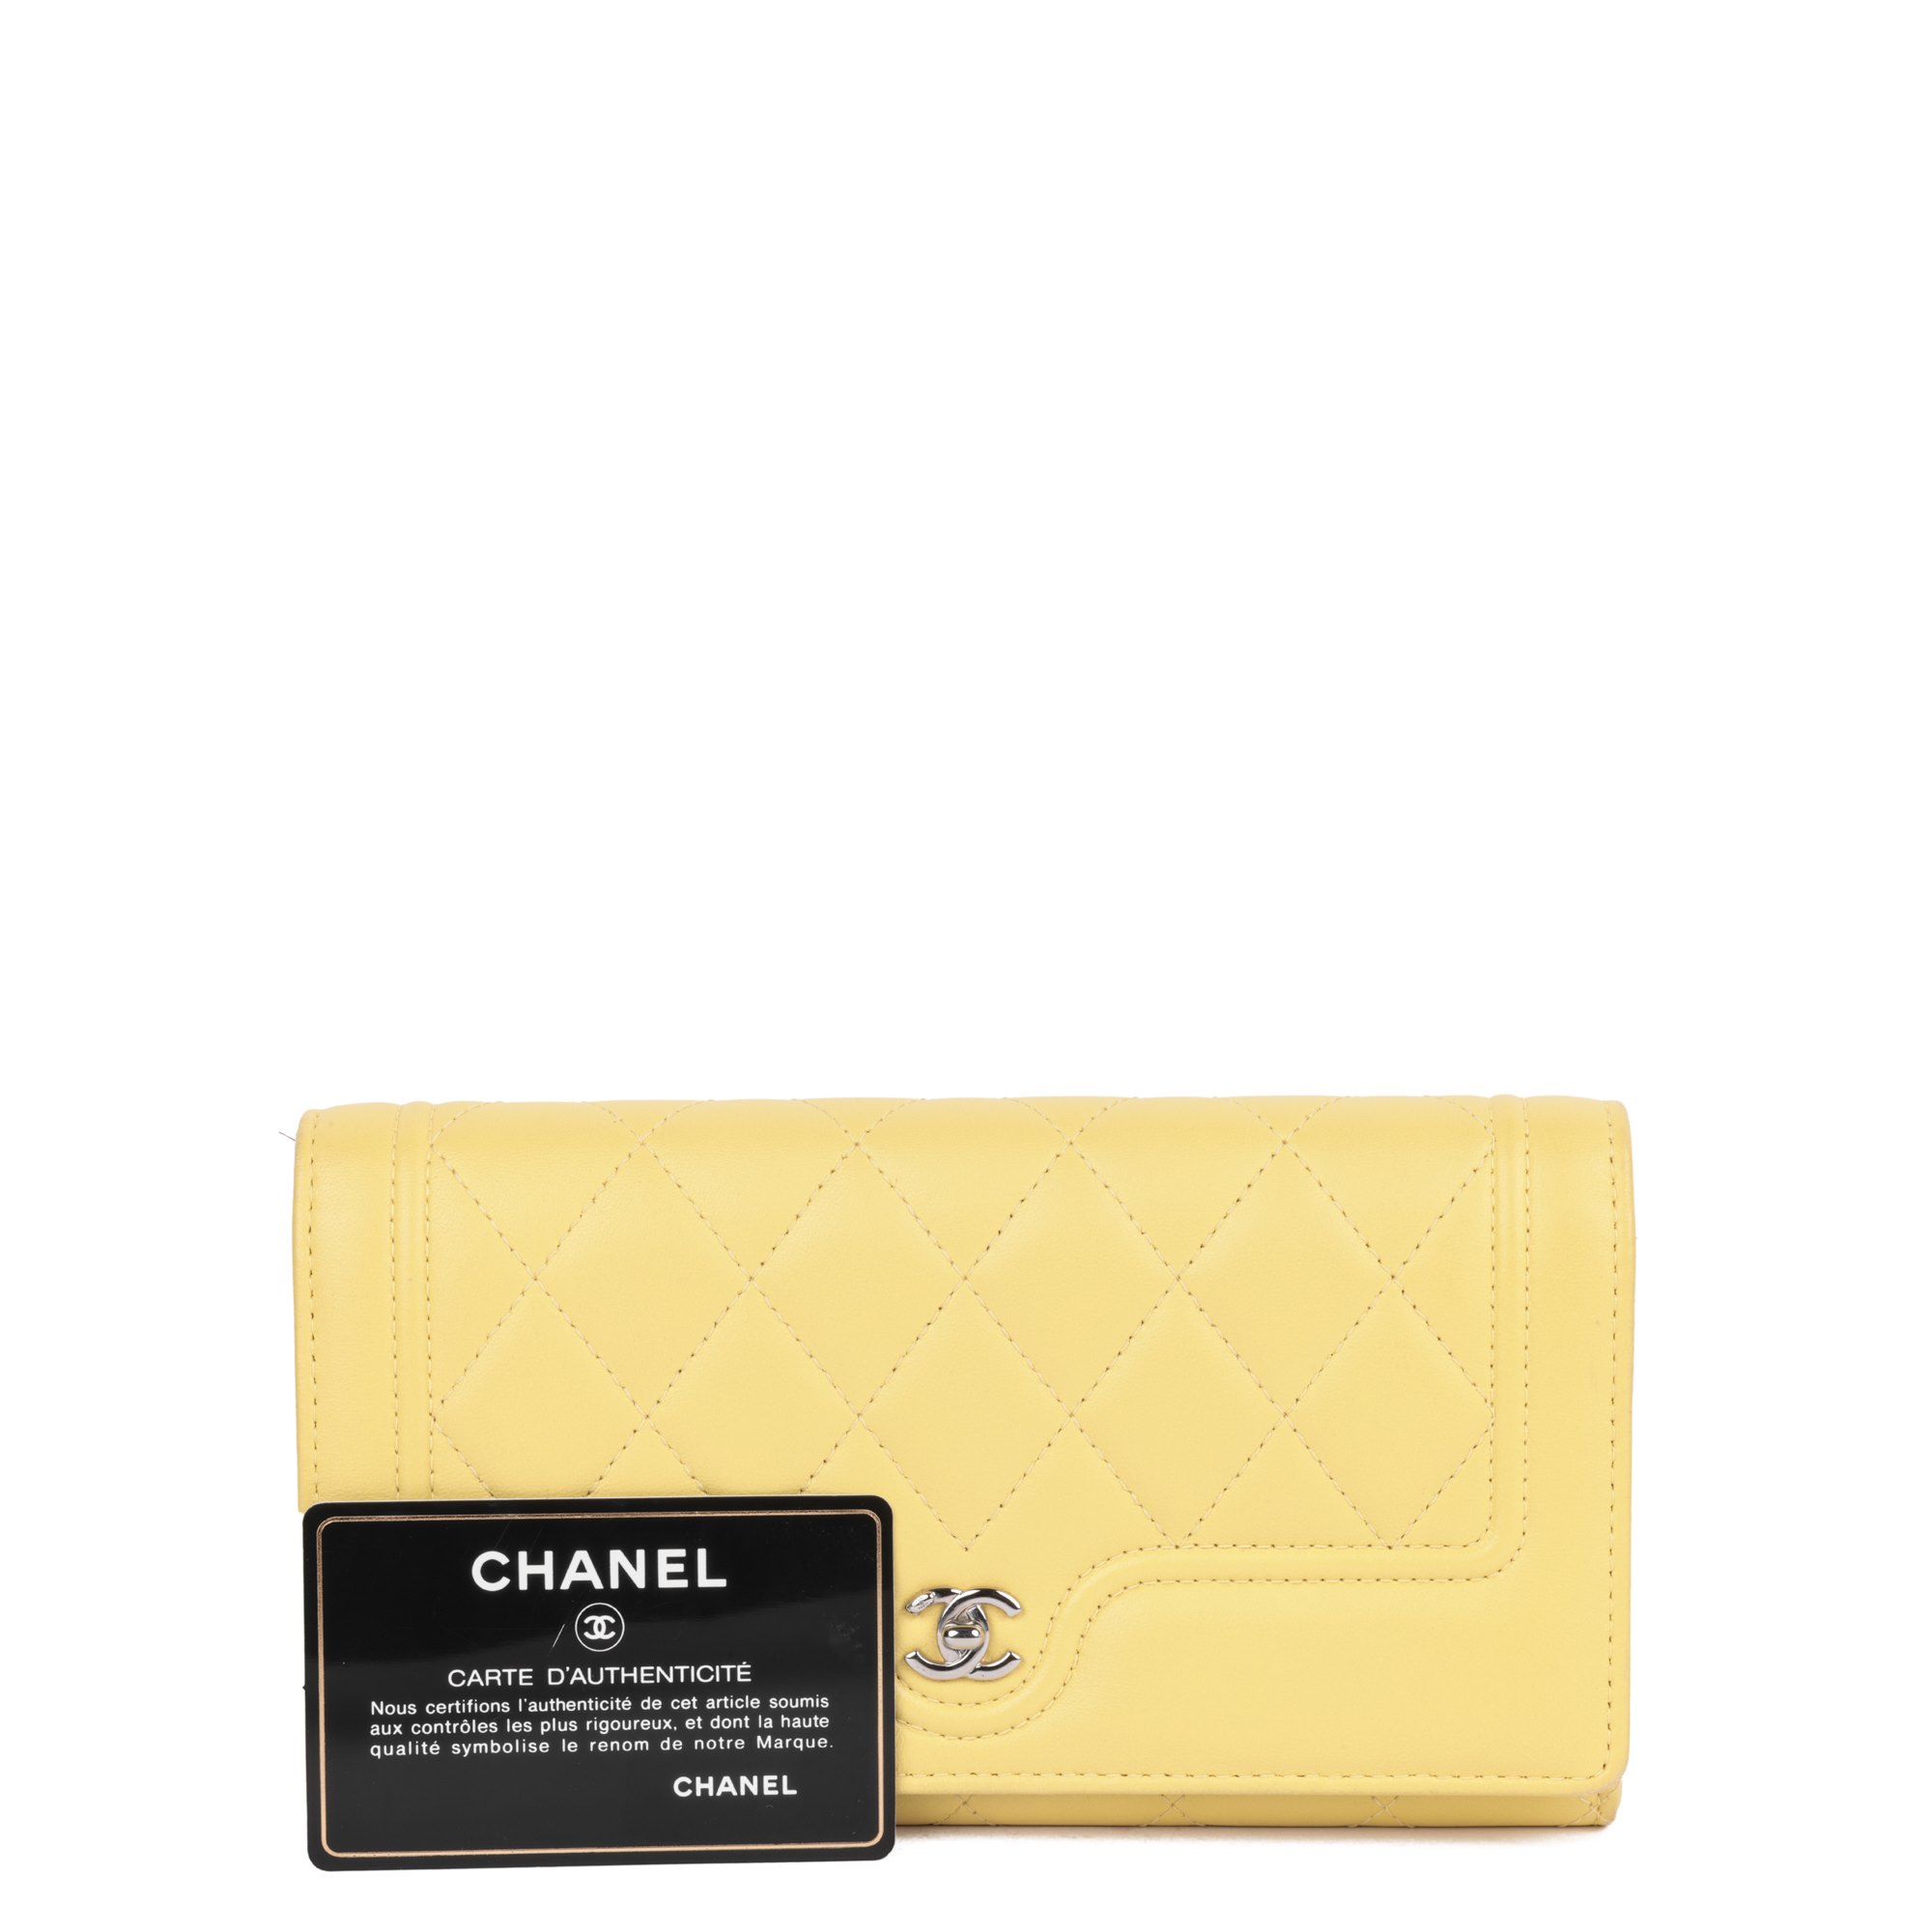 Chanel Yellow Quilted Lambskin Leather Long Wallet